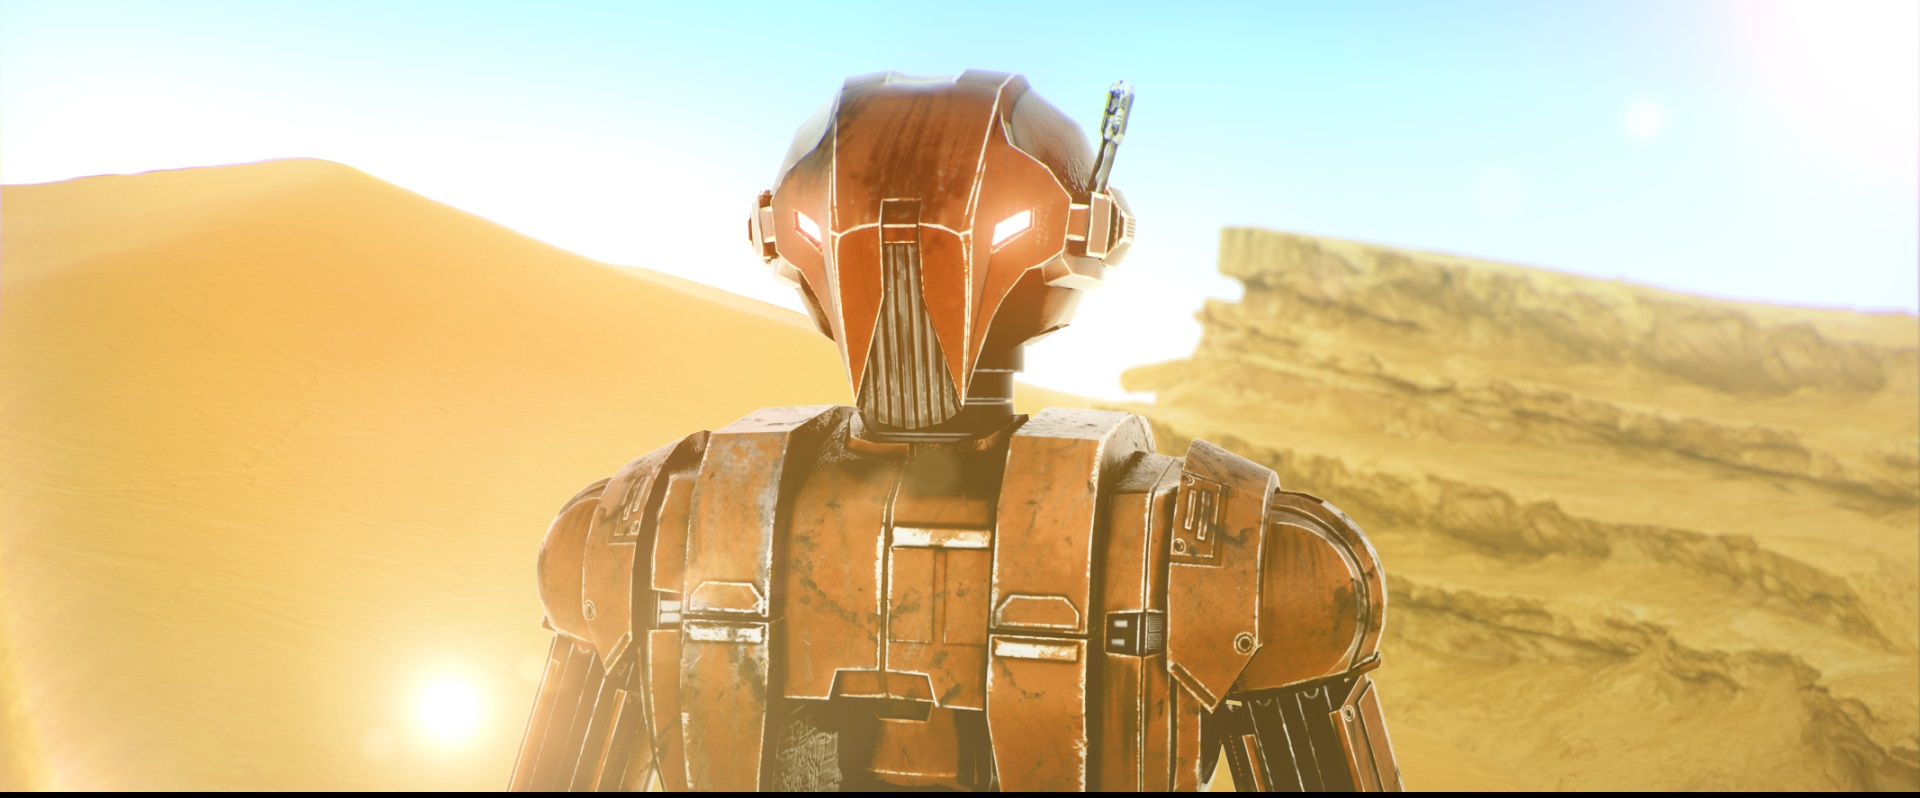 Knights of the Old Republic facts - The Secret of HK-47’s Name